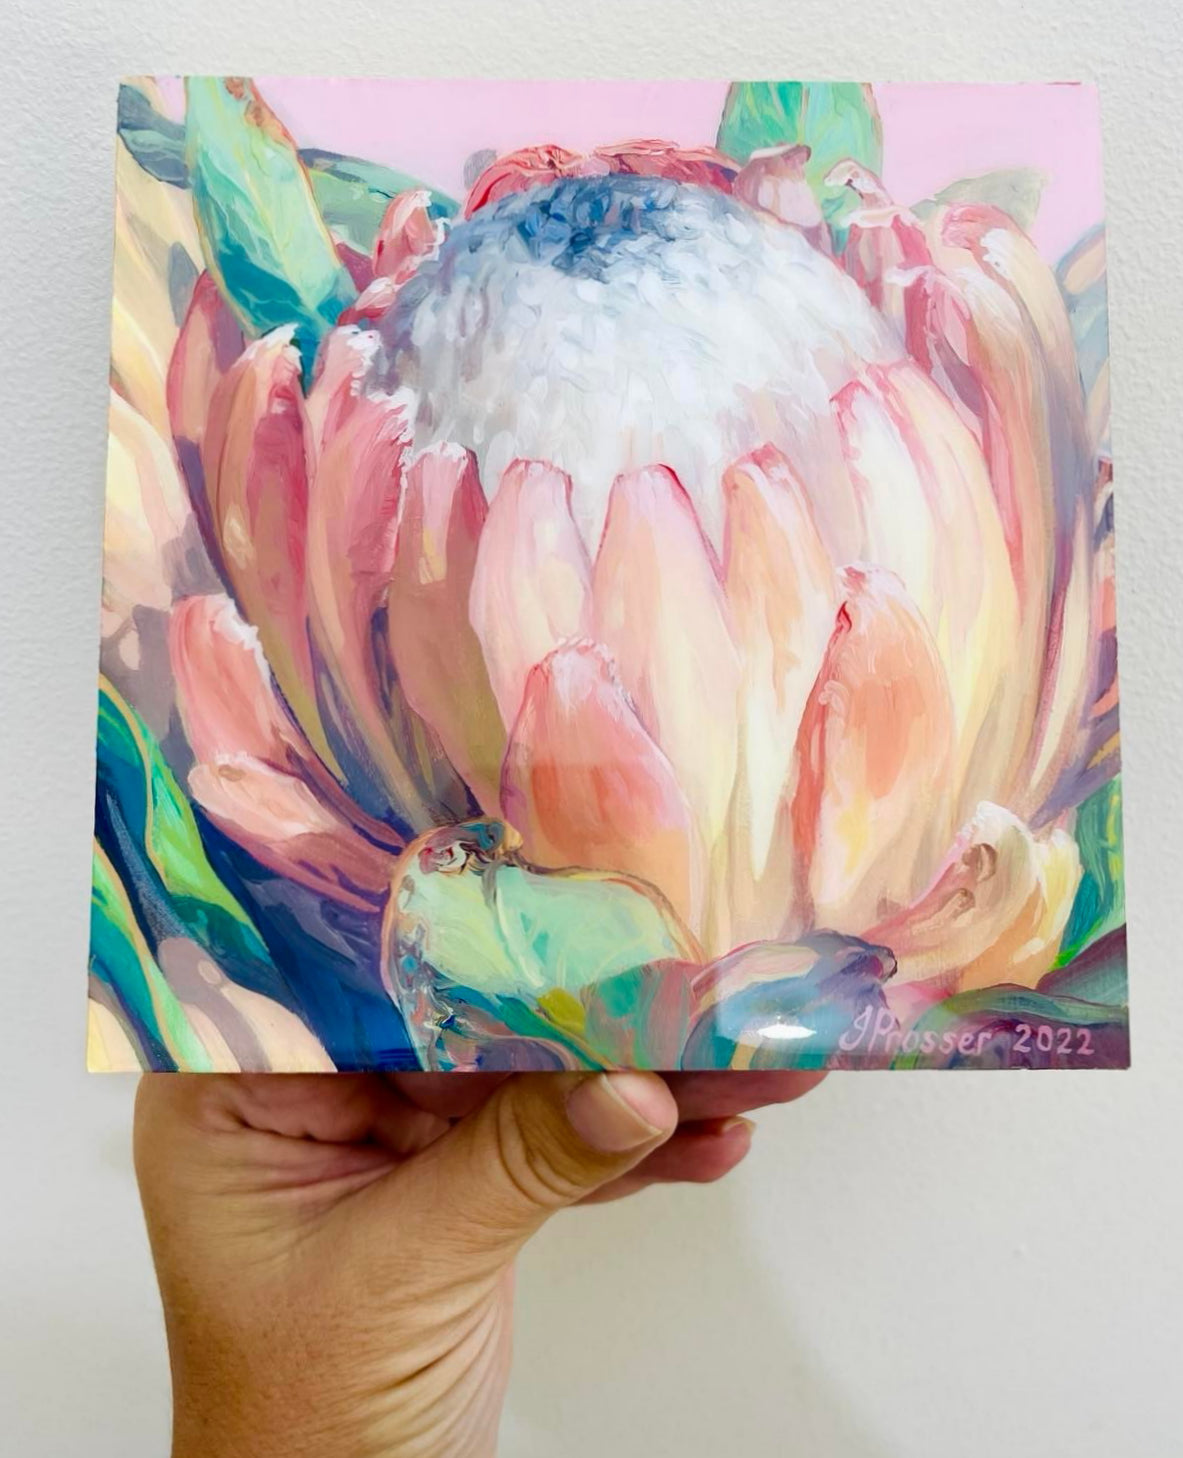 PINK PROTEA PAINTING BY JAIME PROSSER 